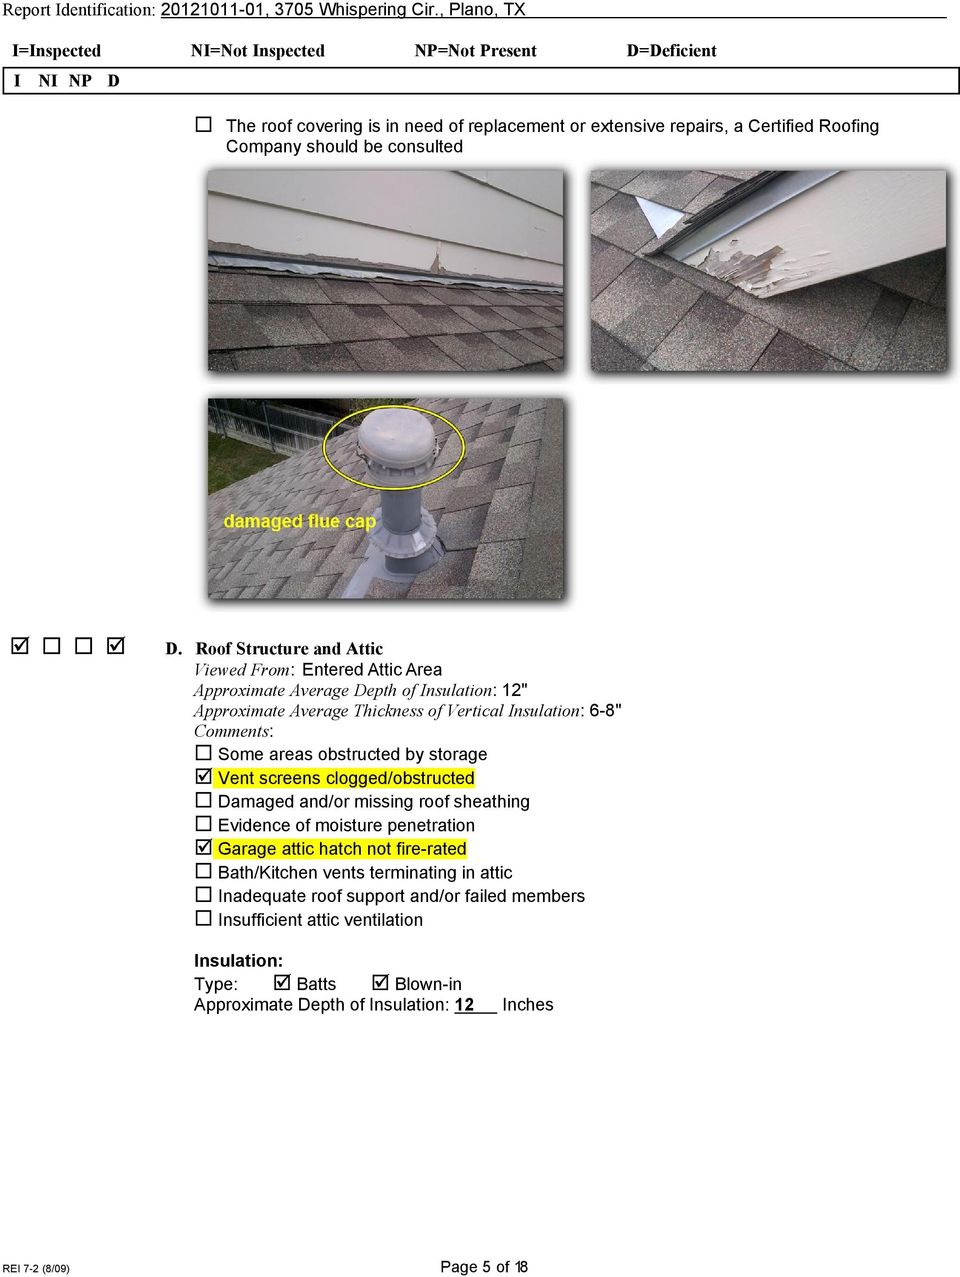 Comments: Some areas obstructed by storage Vent screens clogged/obstructed Damaged and/or missing roof sheathing Evidence of moisture penetration Garage attic hatch